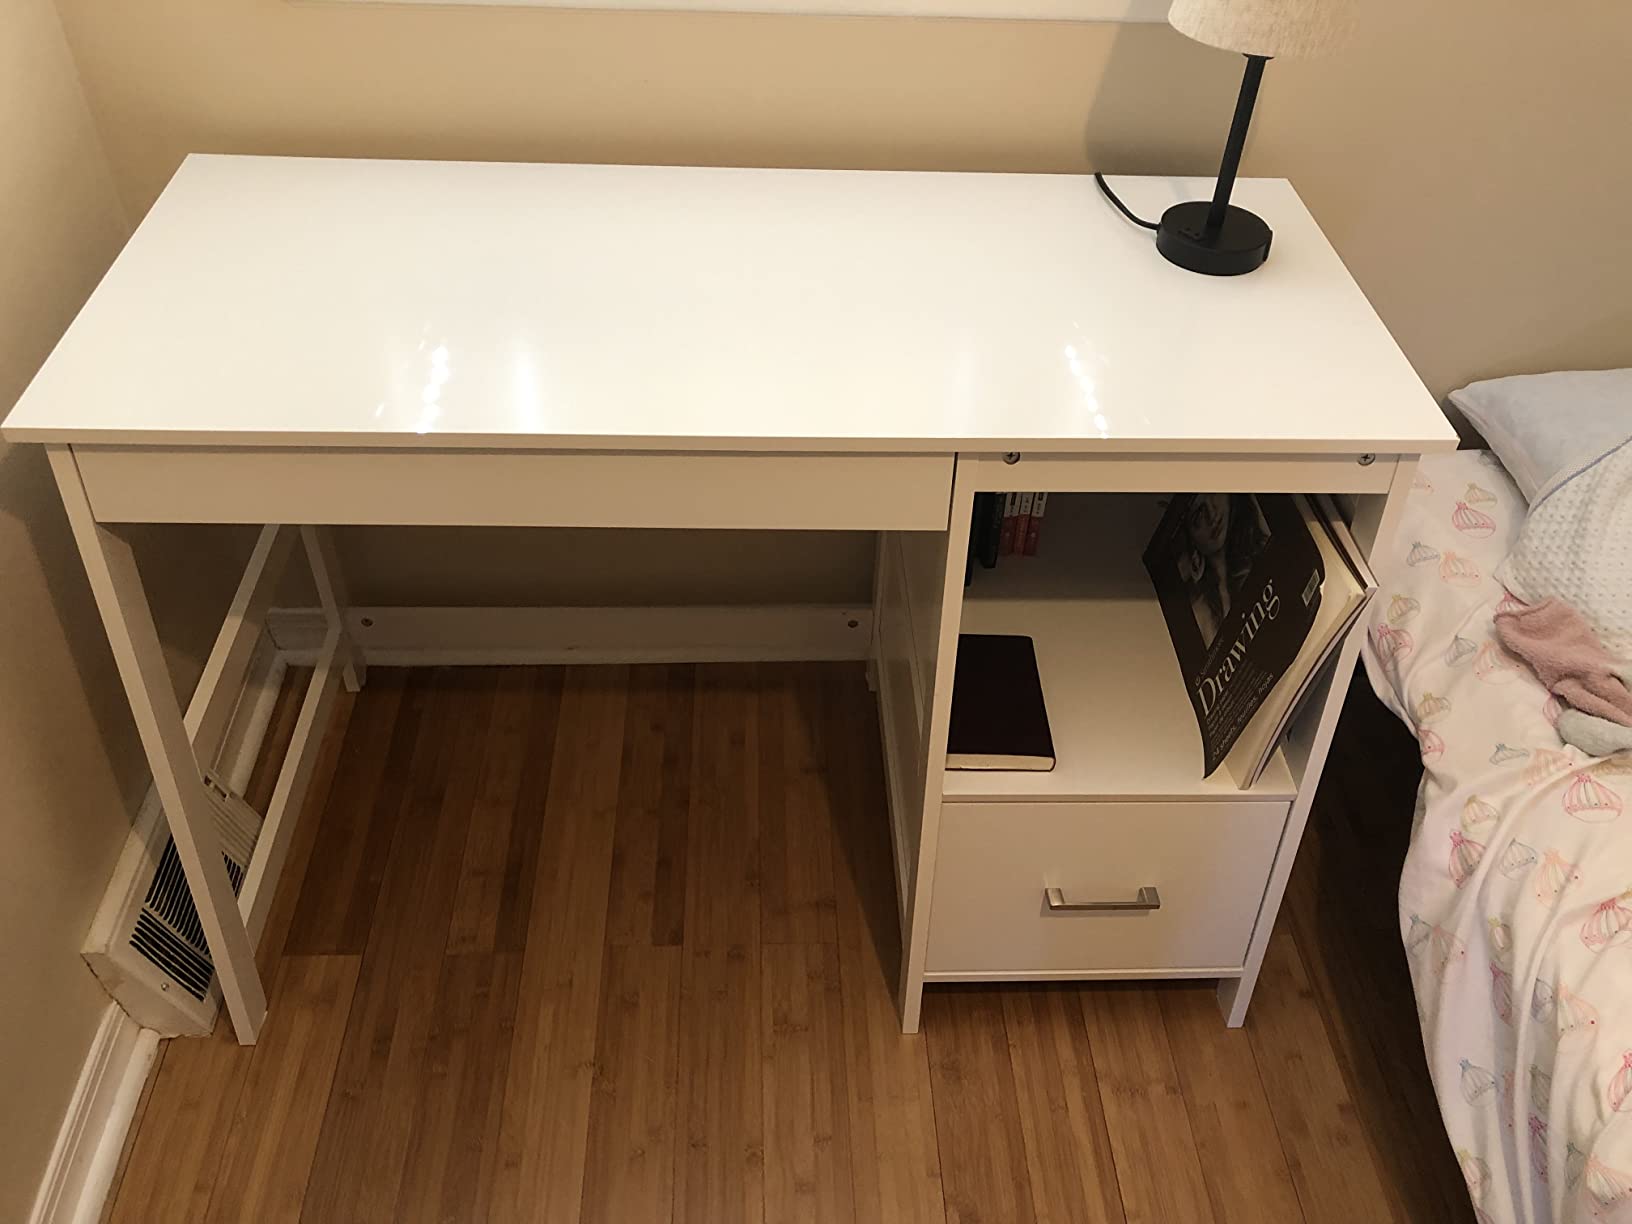 Nice and good-looking desk.